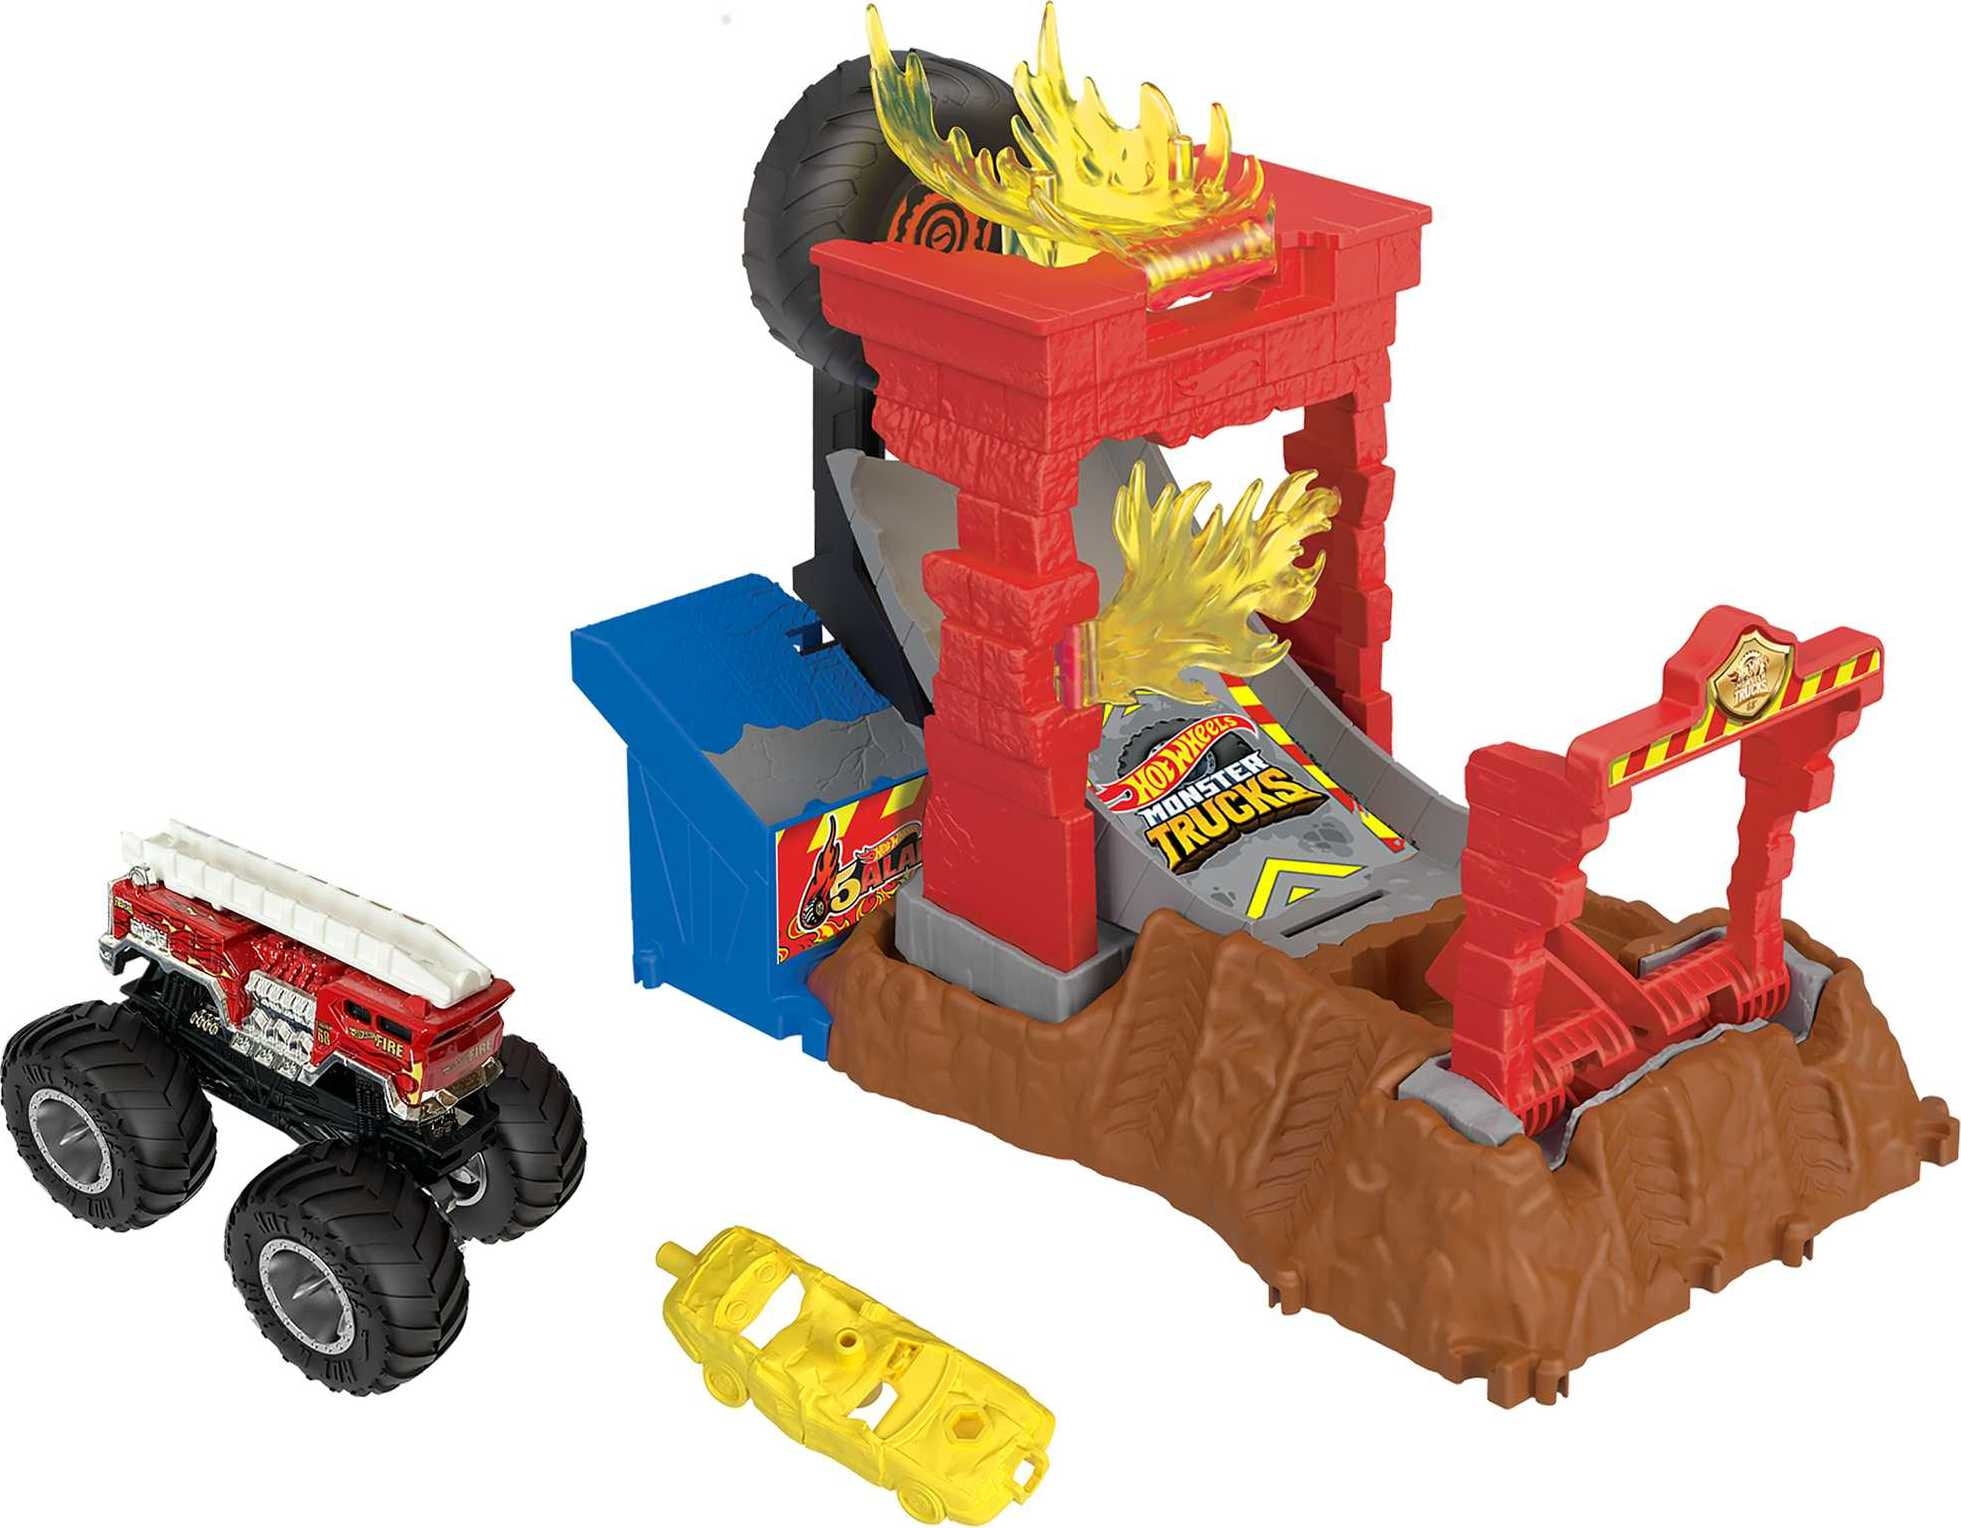 Hot Wheels Monster Truck Mini - PLAYNOW! Toys and Games